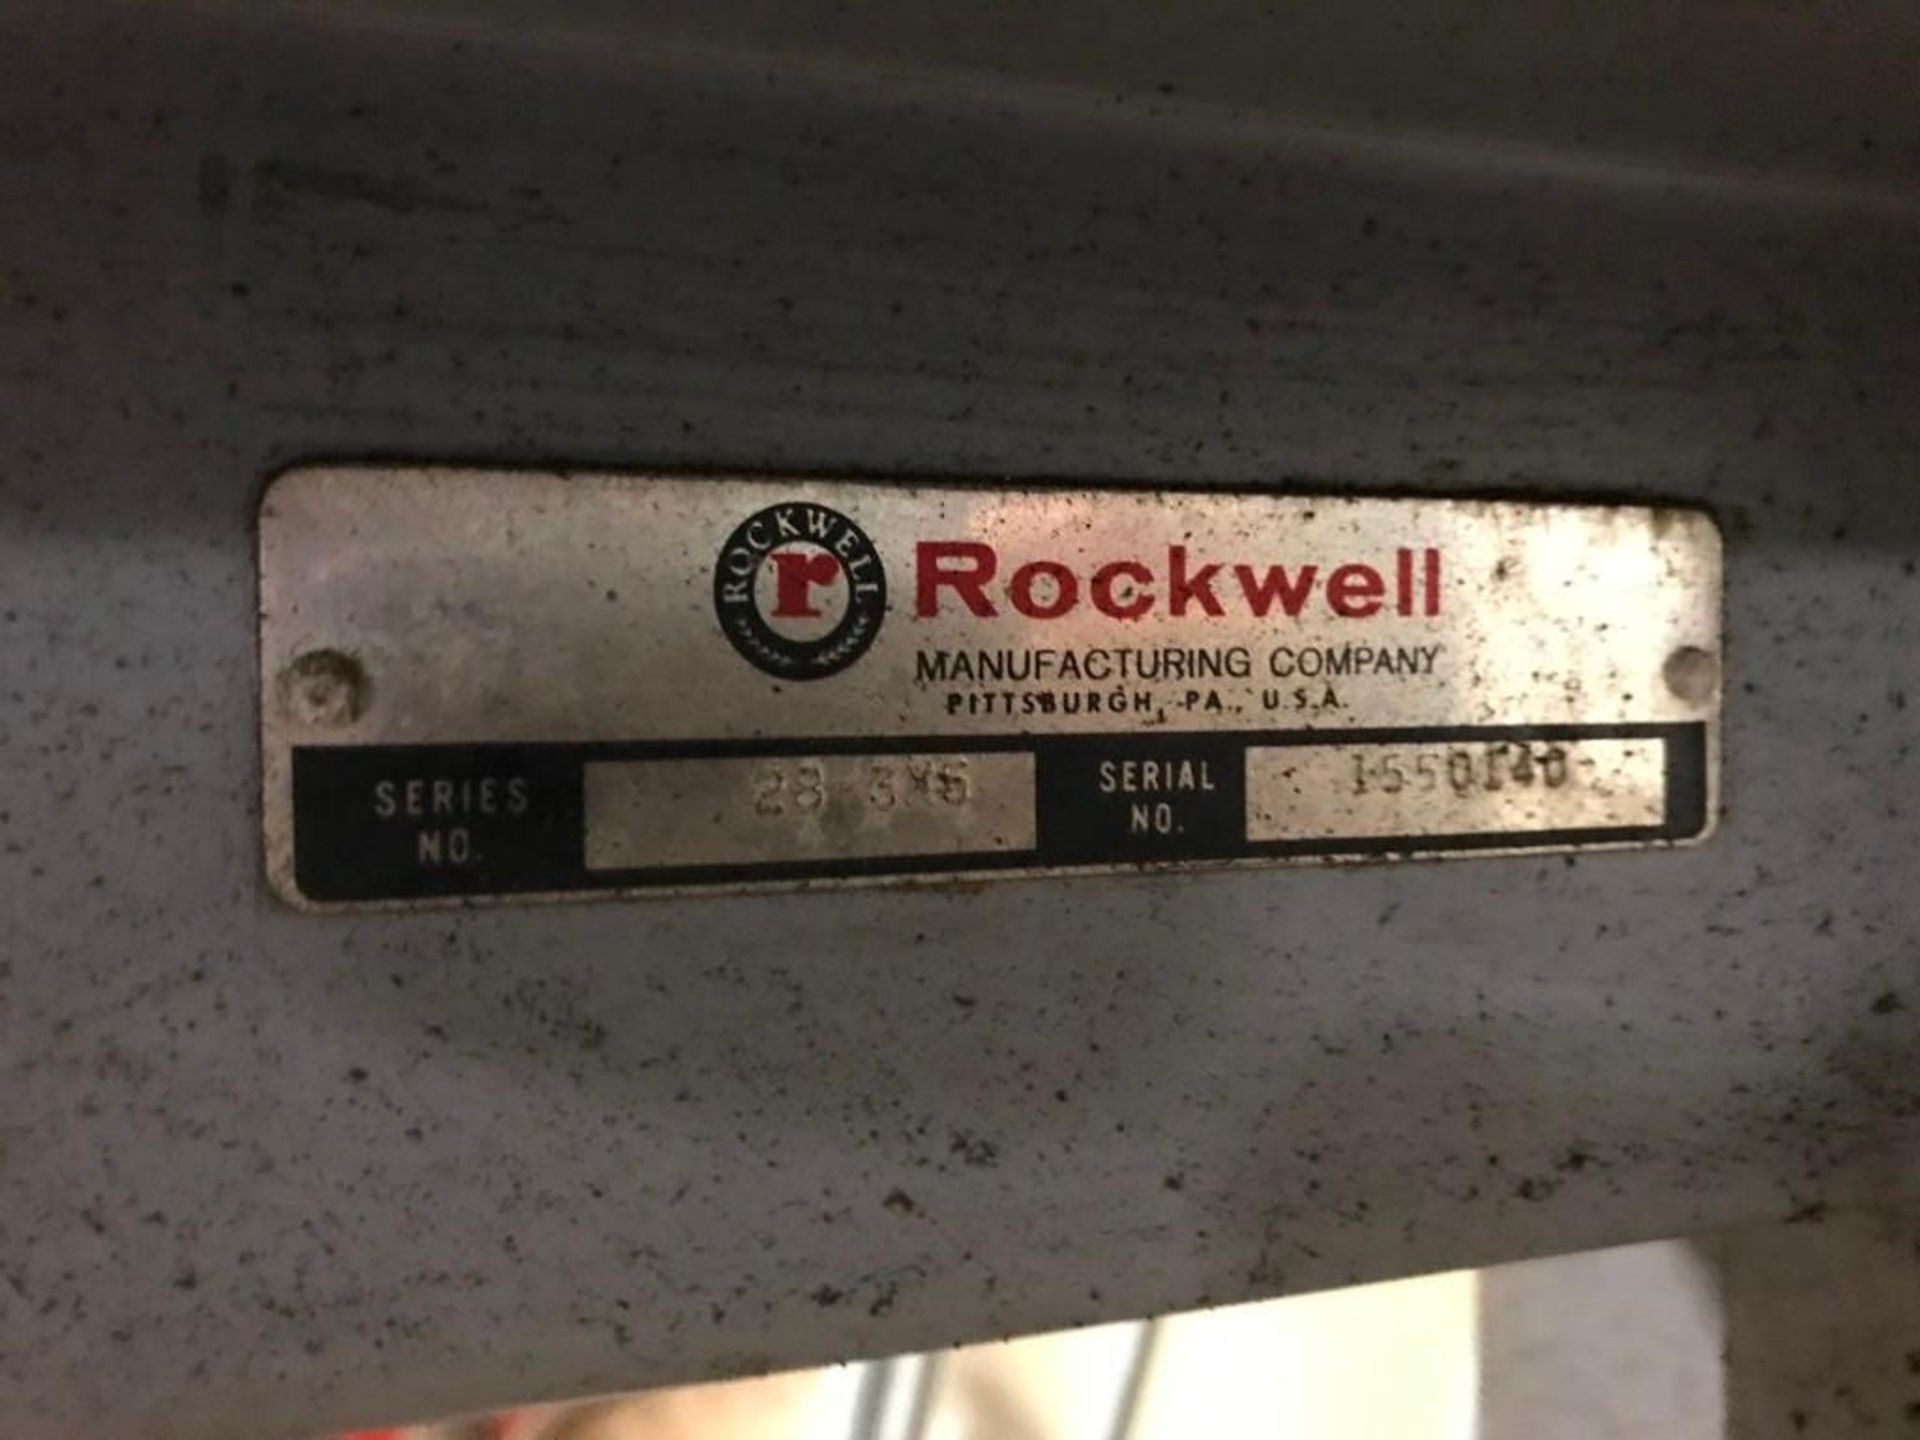 ROCKWELL 28-3X5 VERTICAL BAND SAW - Image 4 of 9